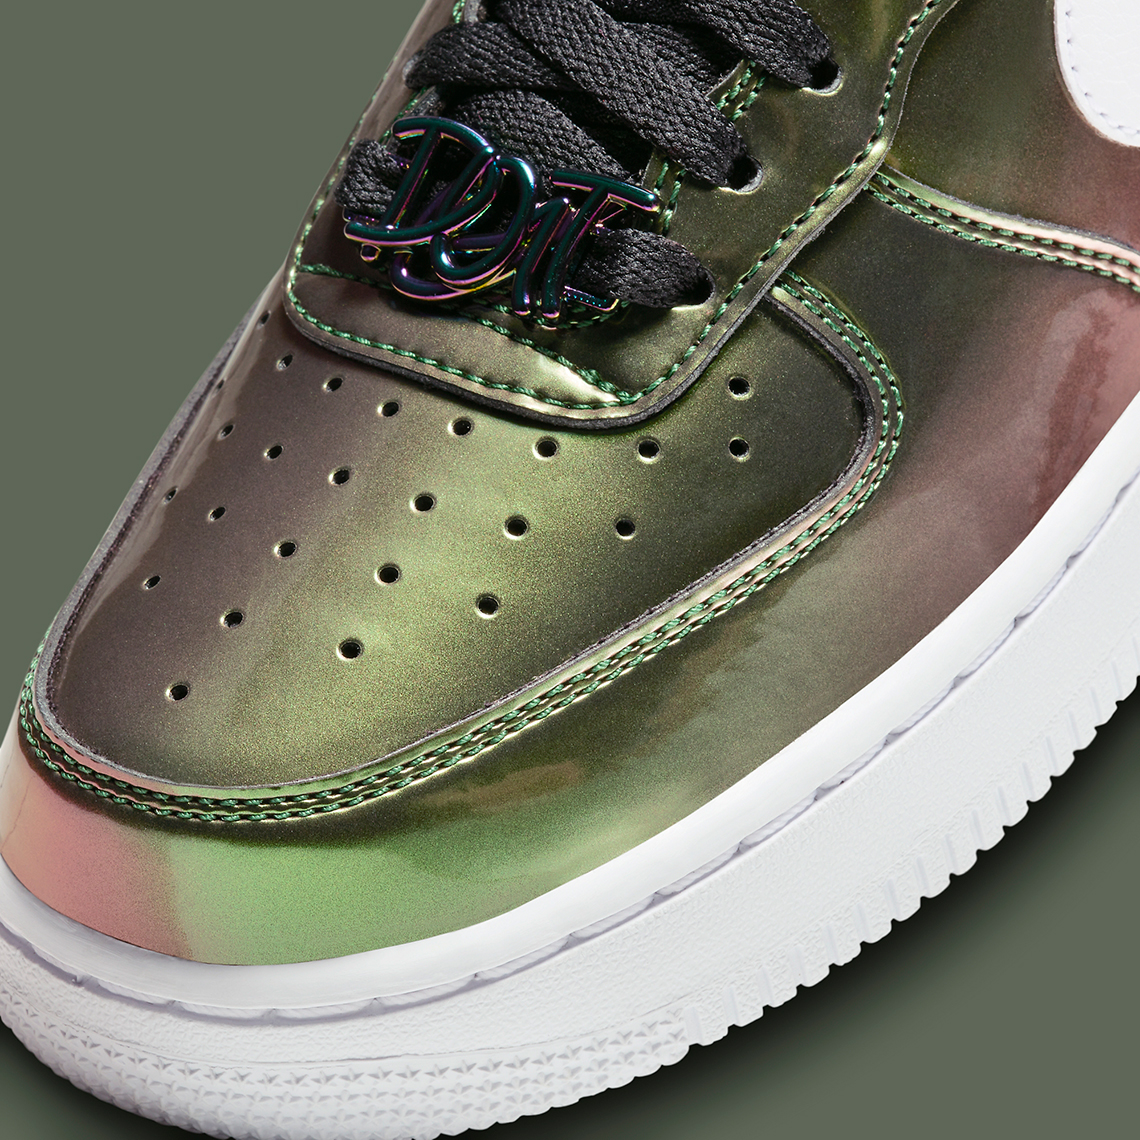 Iridescent Vibes On The Nike Air Force 1 Low •